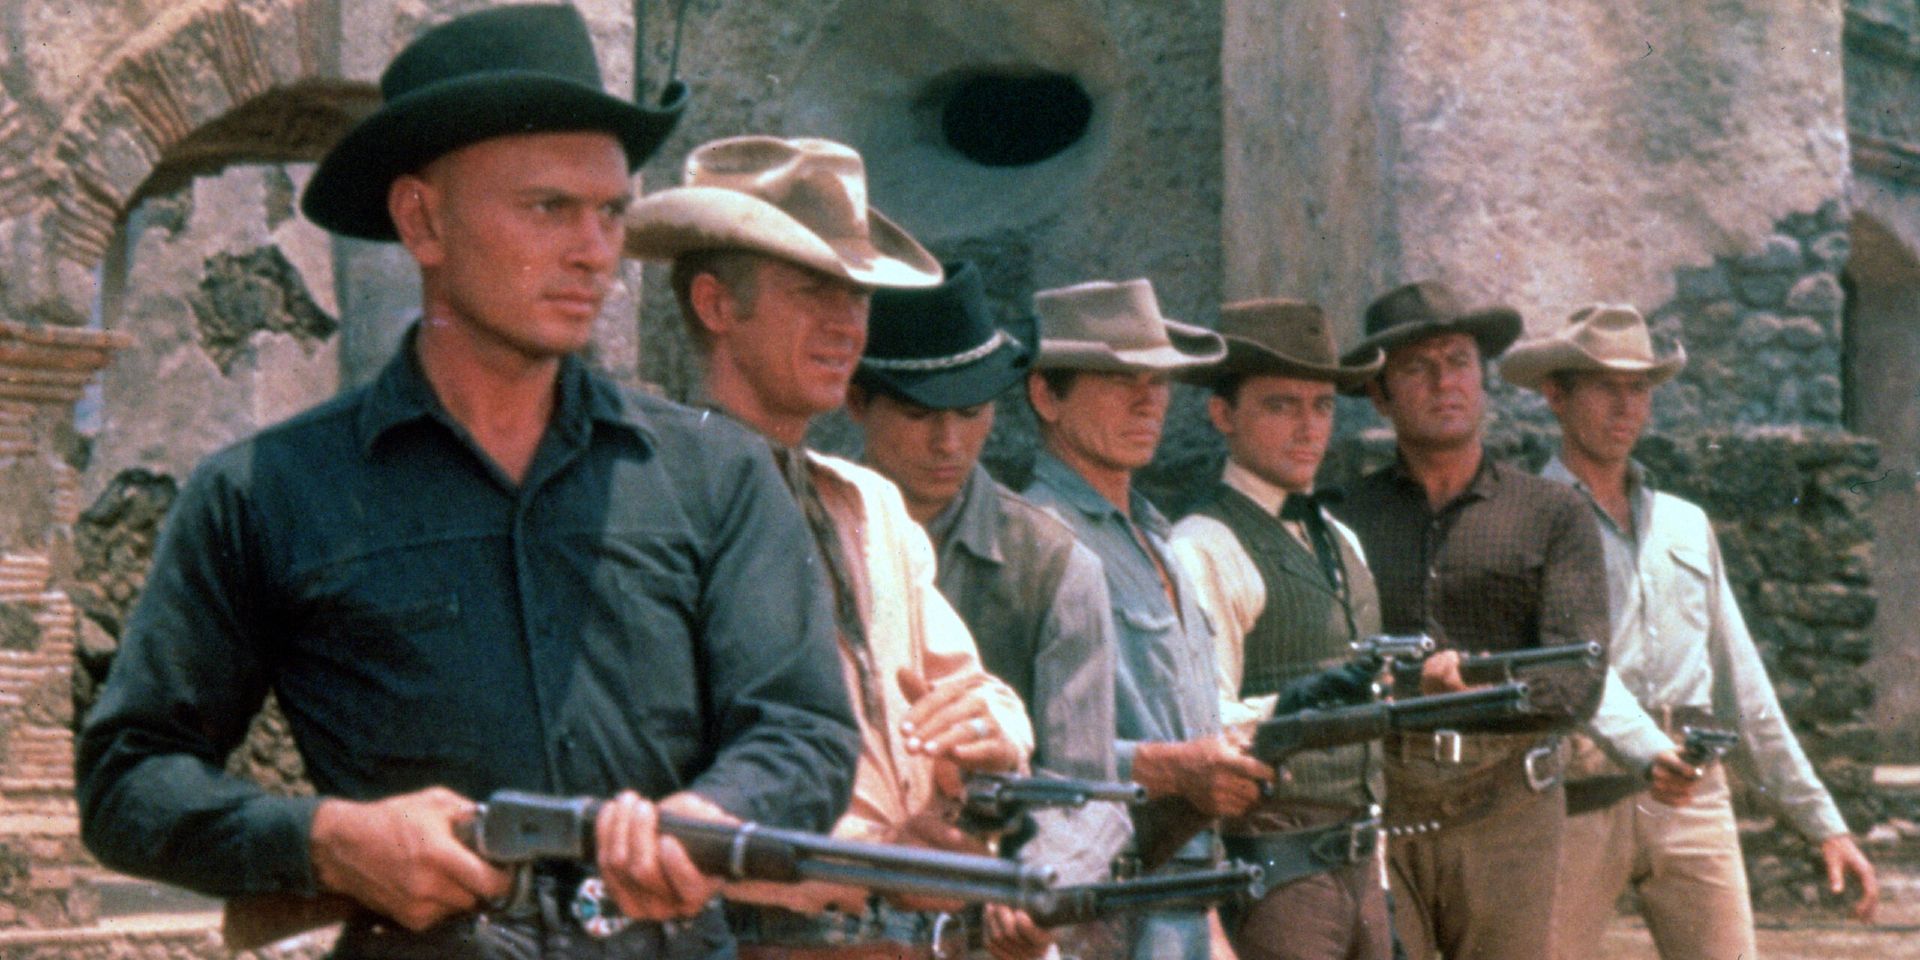 The heroes lined up with their guns in The Magnificent Seven